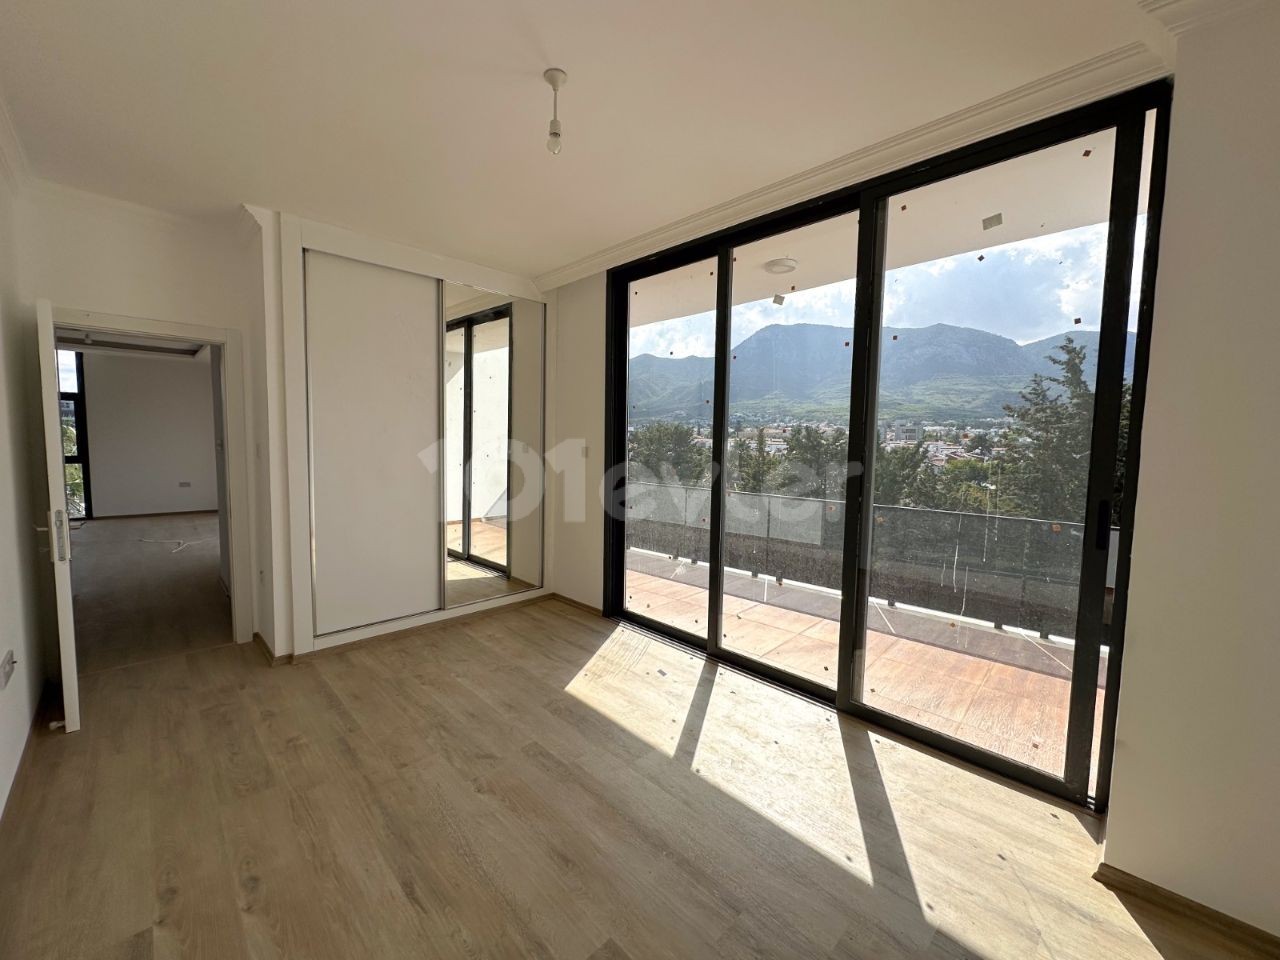 2+1 FLAT WITH COMMERCIAL PERMIT FOR SALE IN KARAKUM, KIRNE, ON THE STREET WITH MOUNTAIN VIEW!!